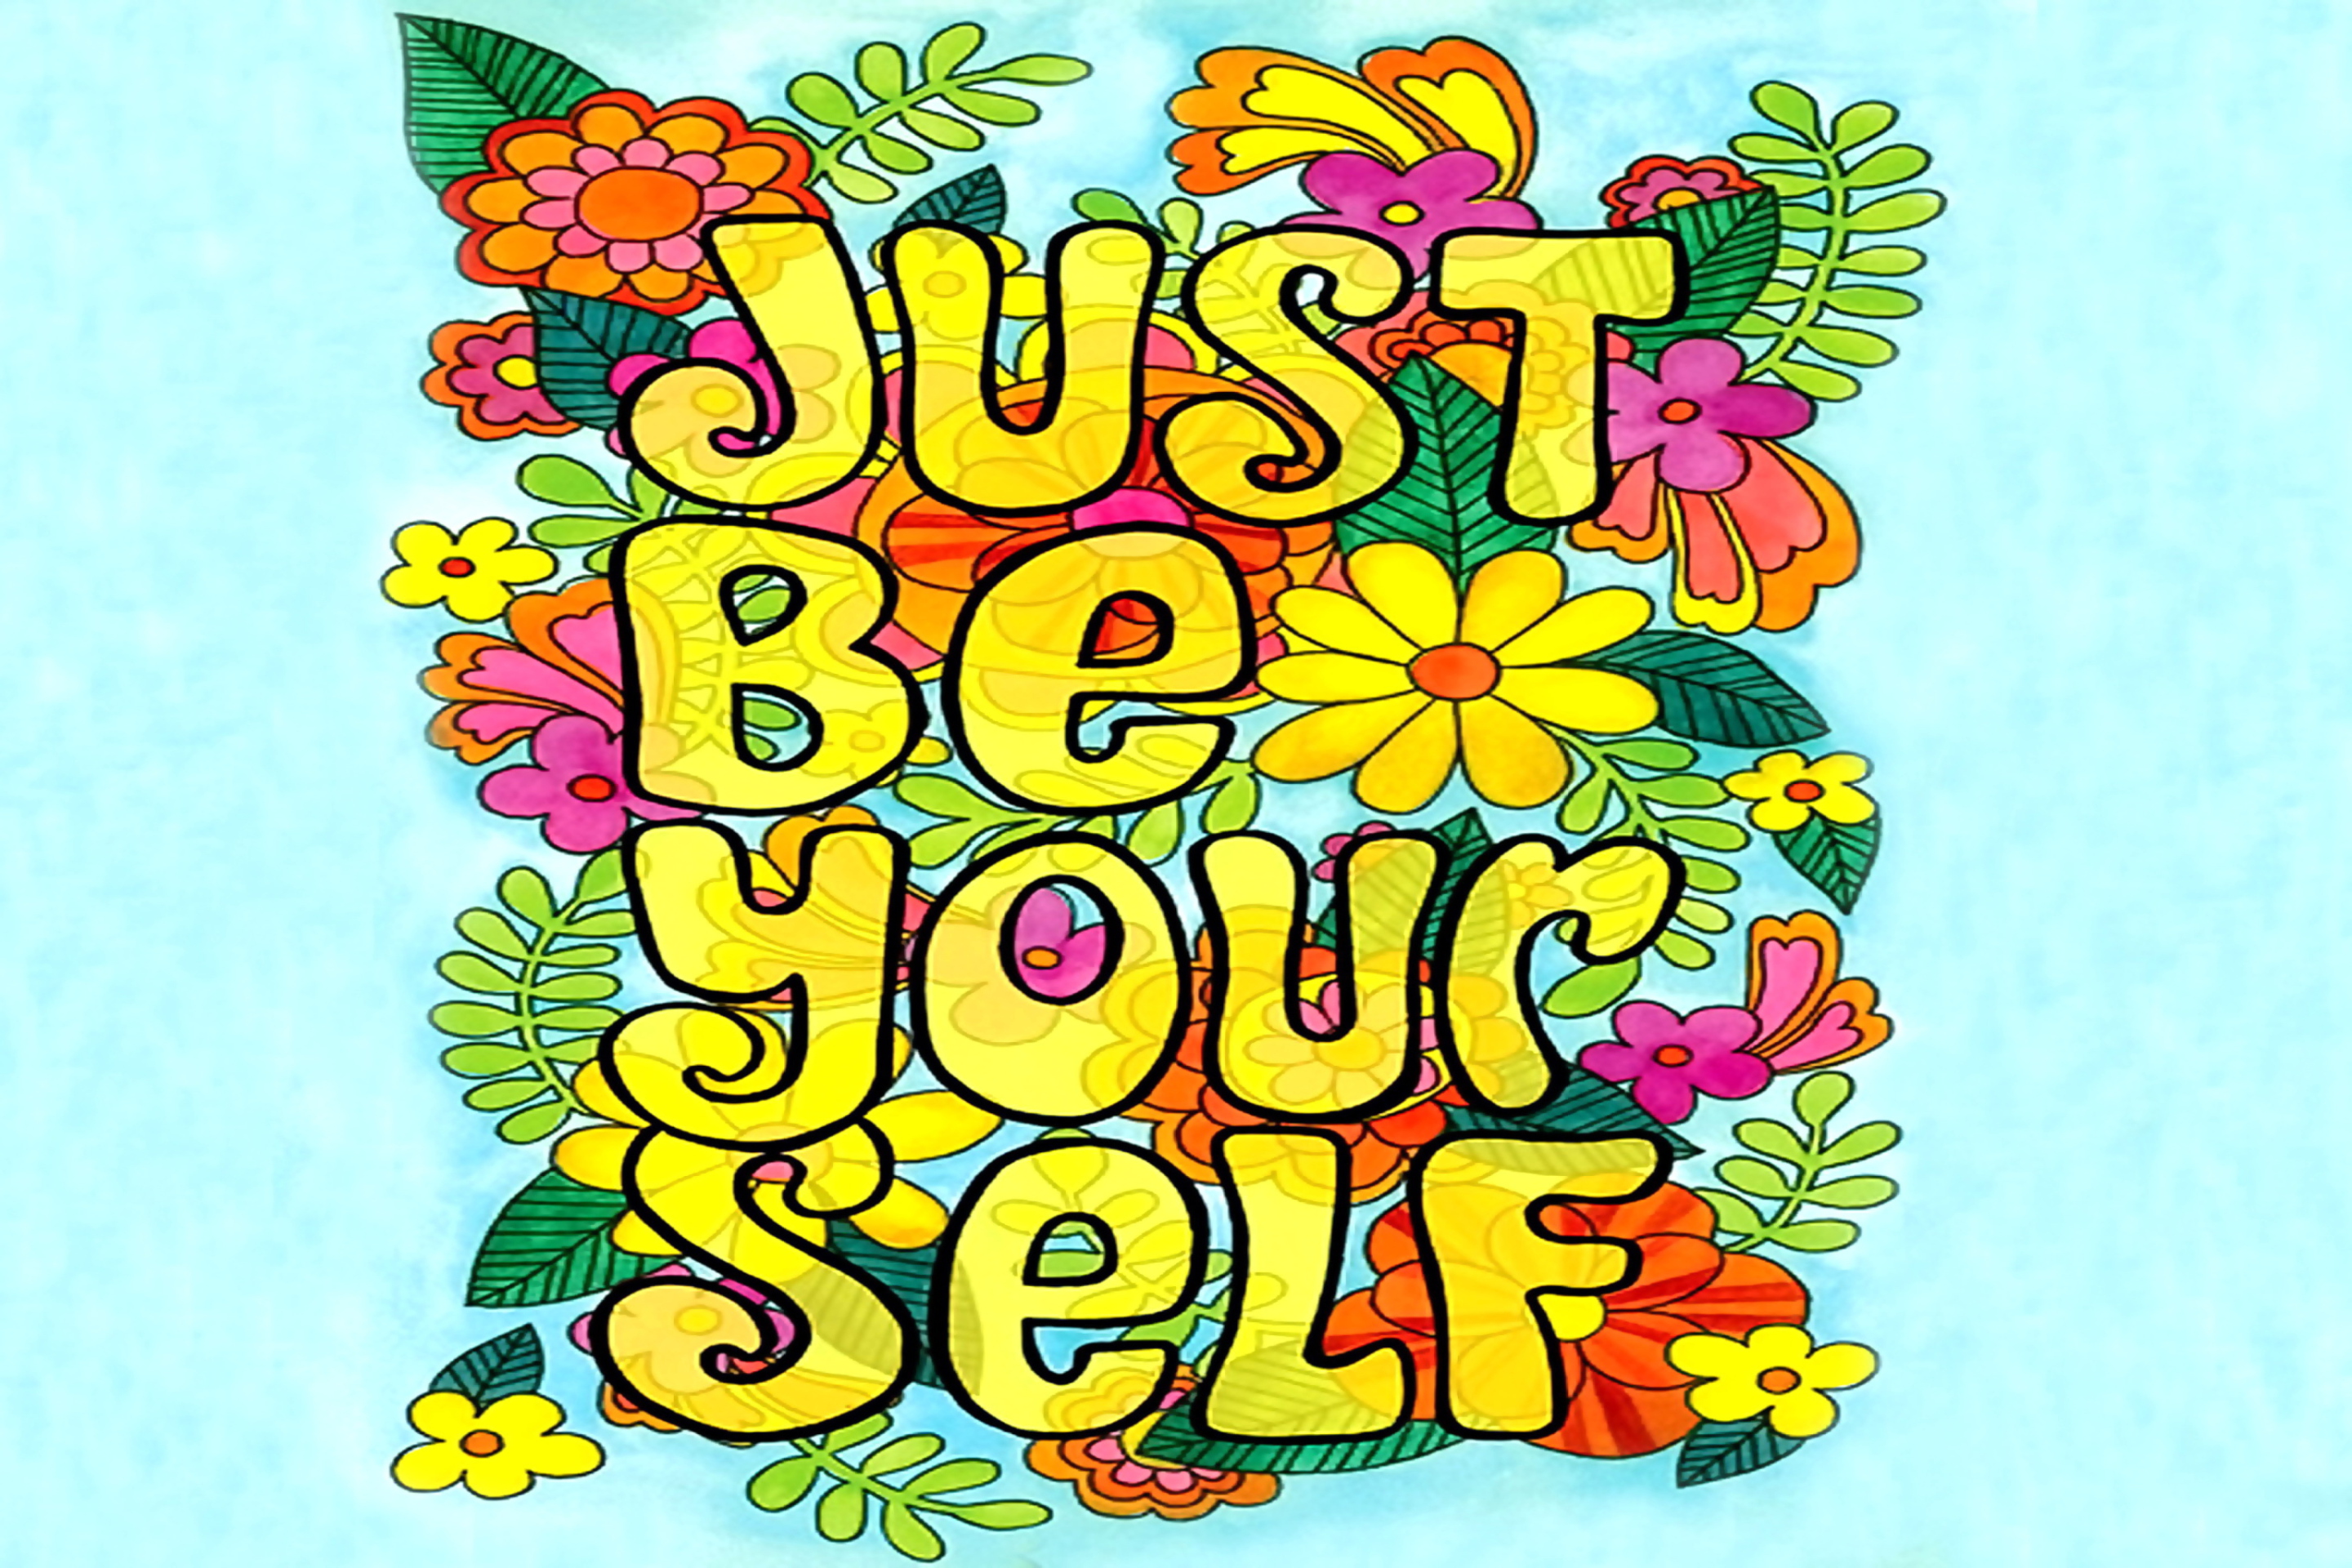 Just Be Yourself wallpaper 2880x1920